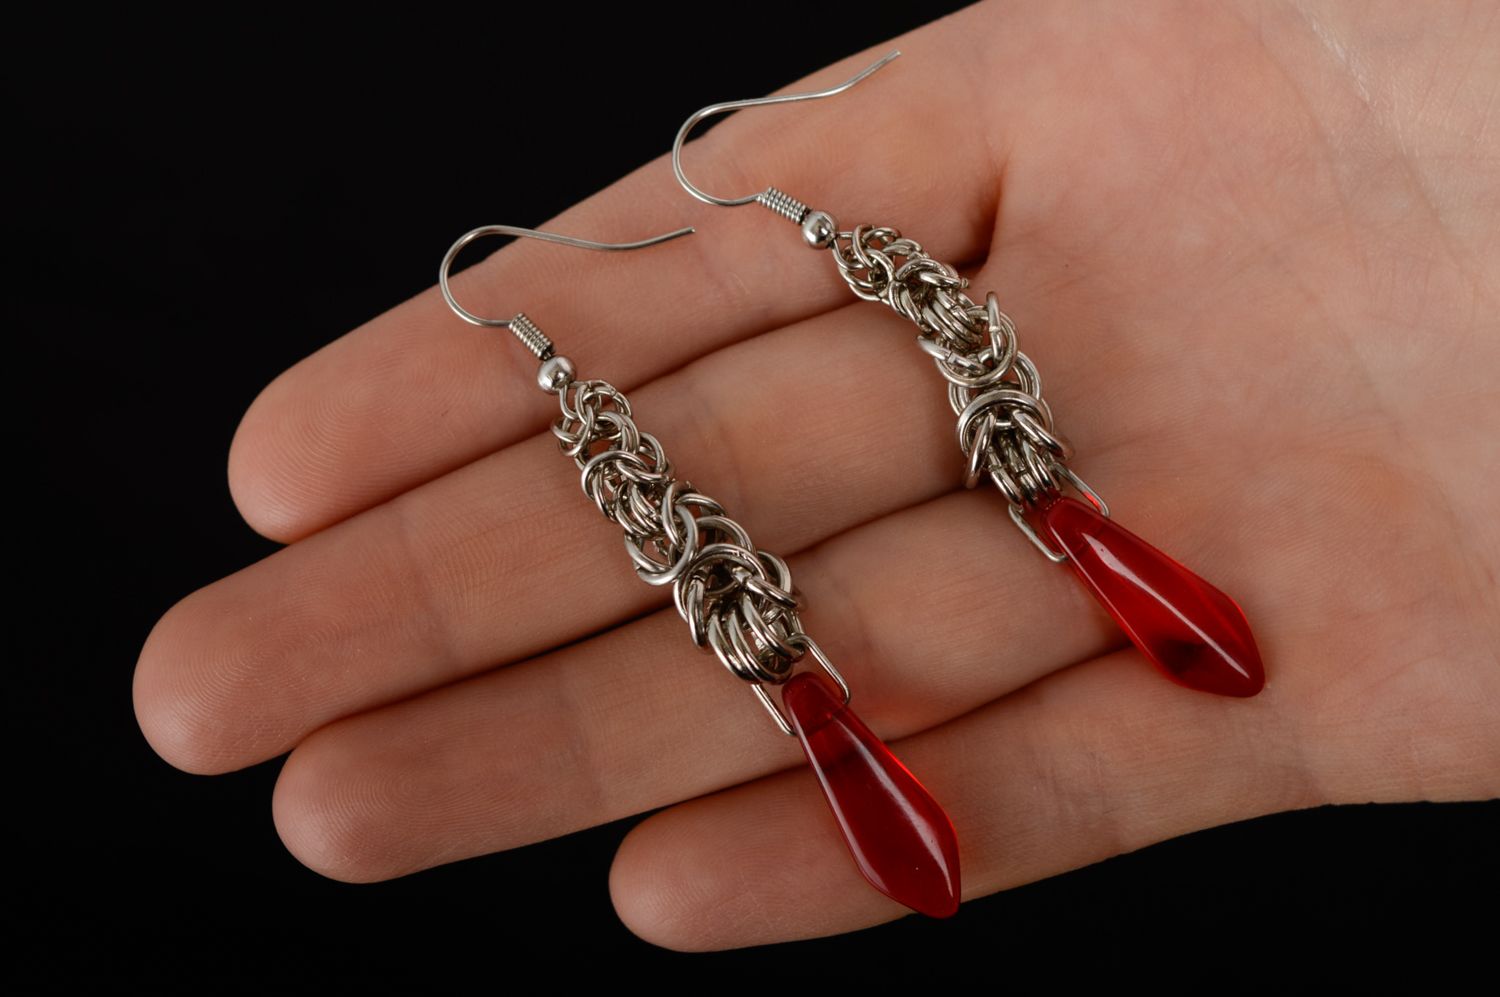 Long metal earrings with red beads made using chain armor weaving technique photo 4